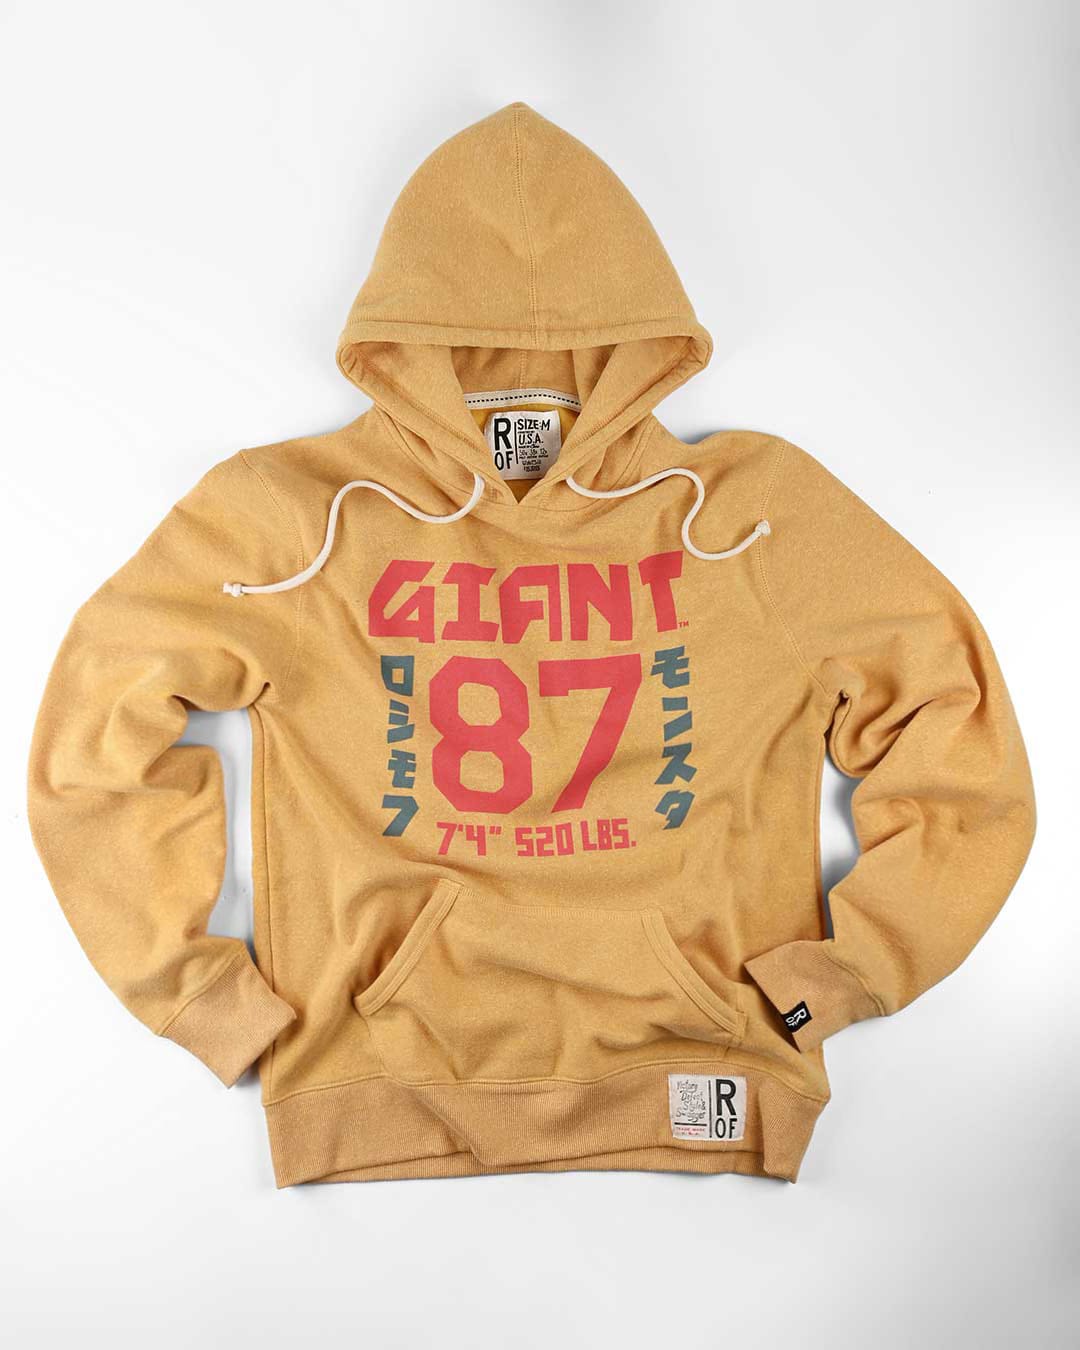 Andre the Giant '87 Yellow PO Hoody - Roots of Fight